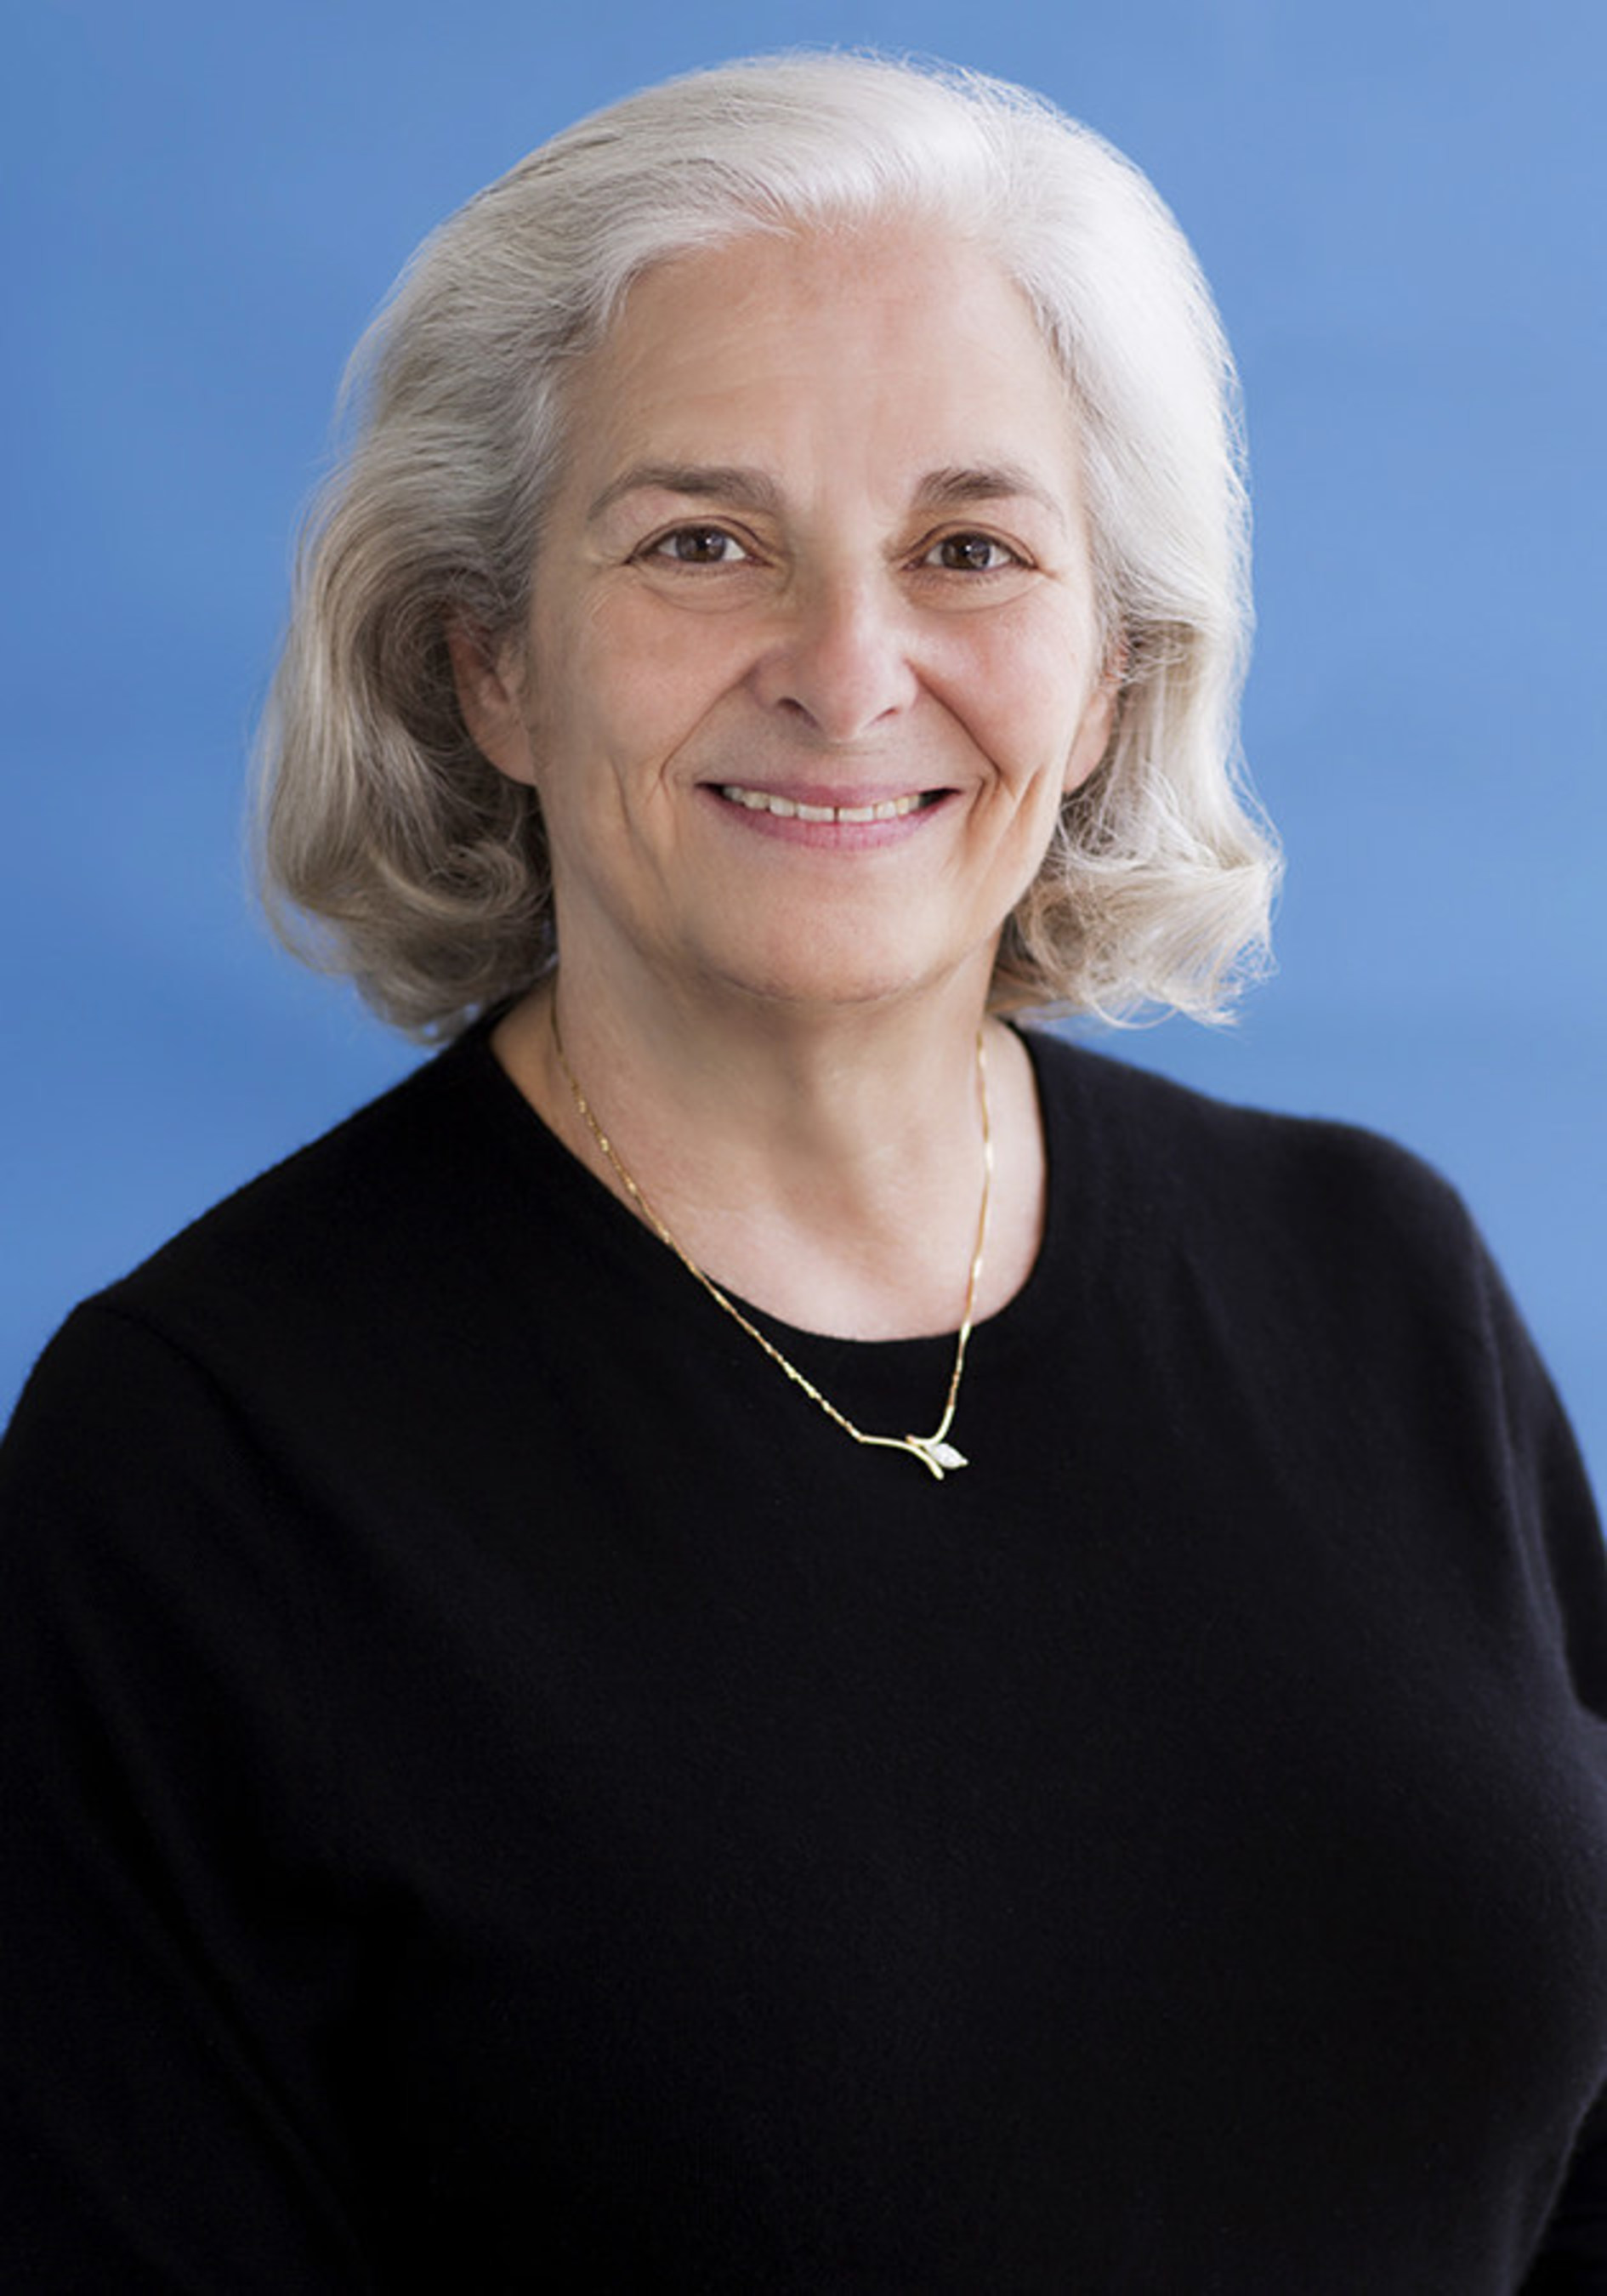 H. Debra Levin, co-chair of Jenner & Block's Private Wealth Practice